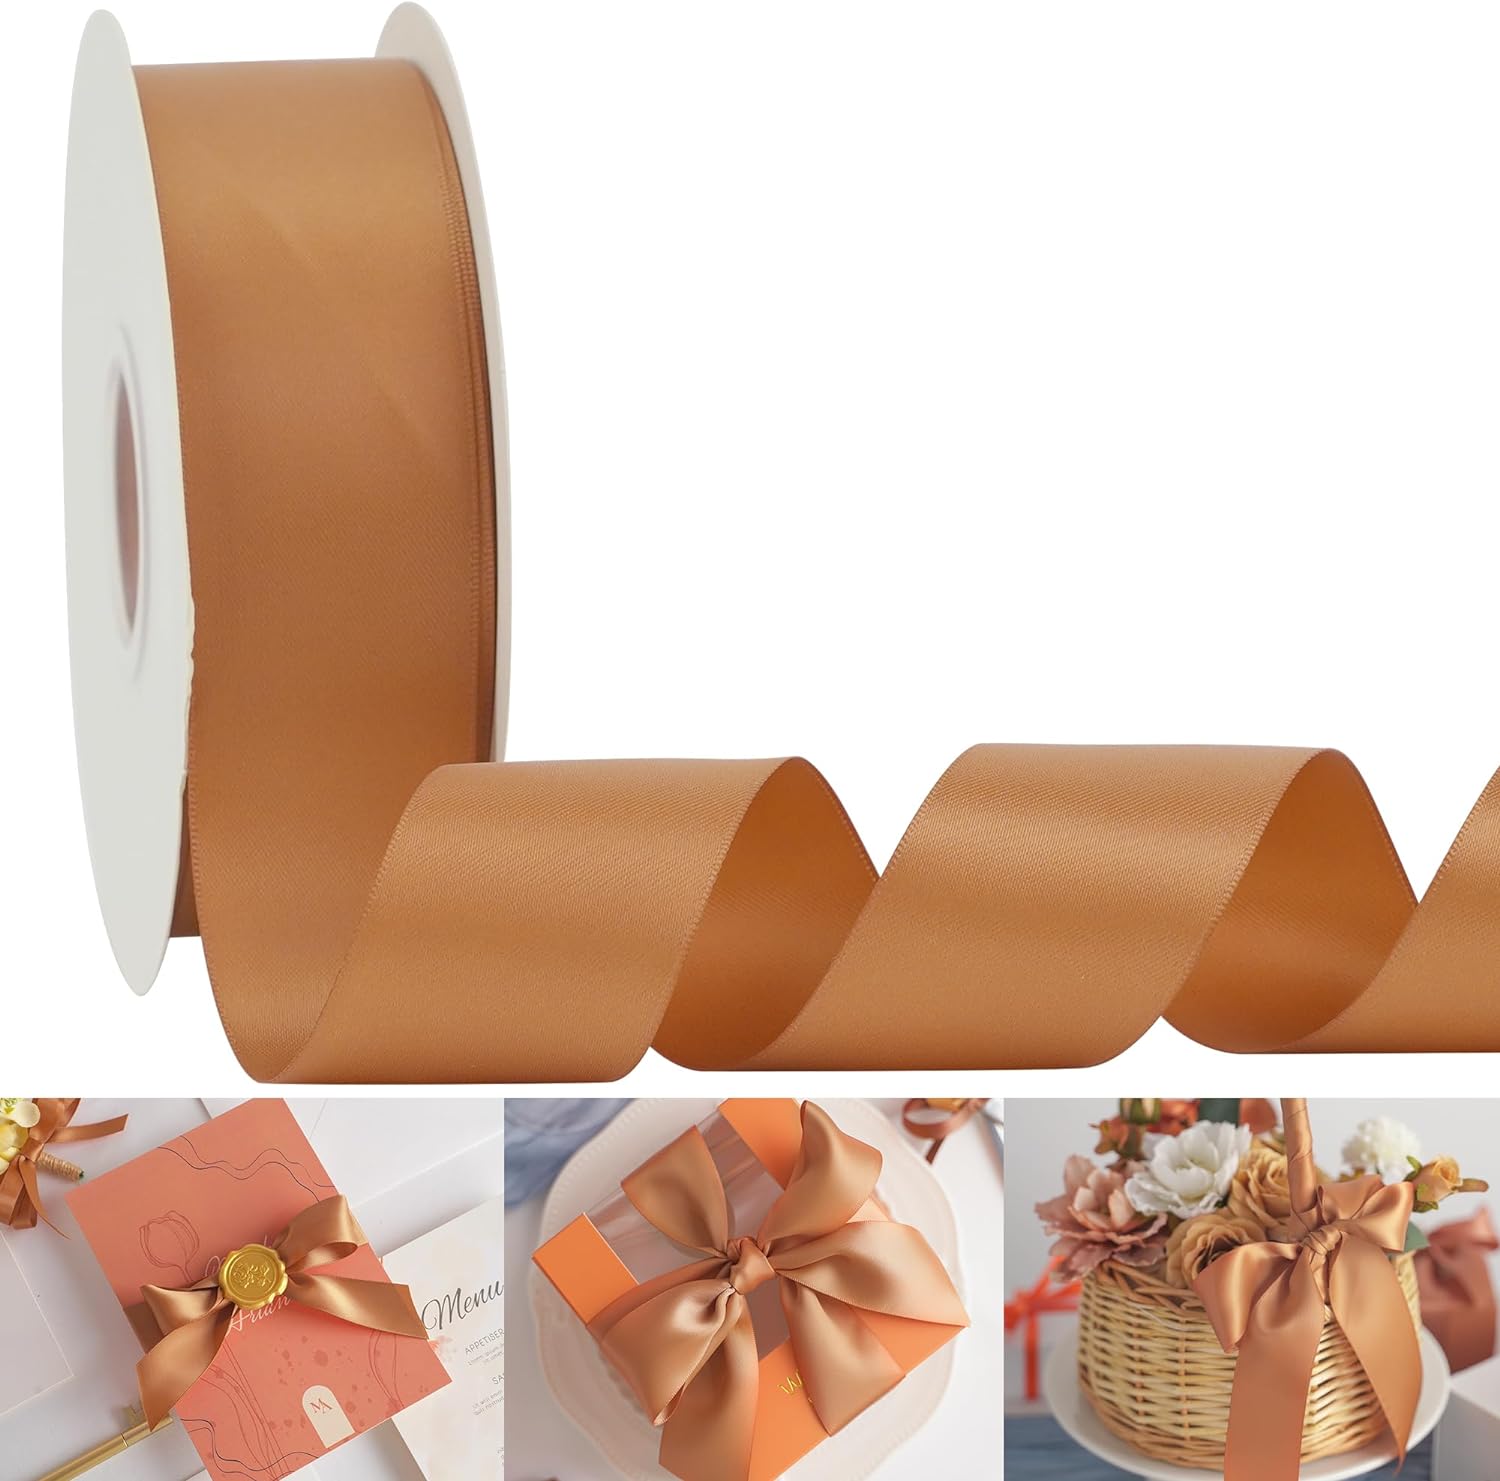 LEMO Terracotta Ribbon 1-12 inch Double-Faced Satin Ribbon for Fall Wedding, Crafts, Gift Wrapping, Flower Bouquet